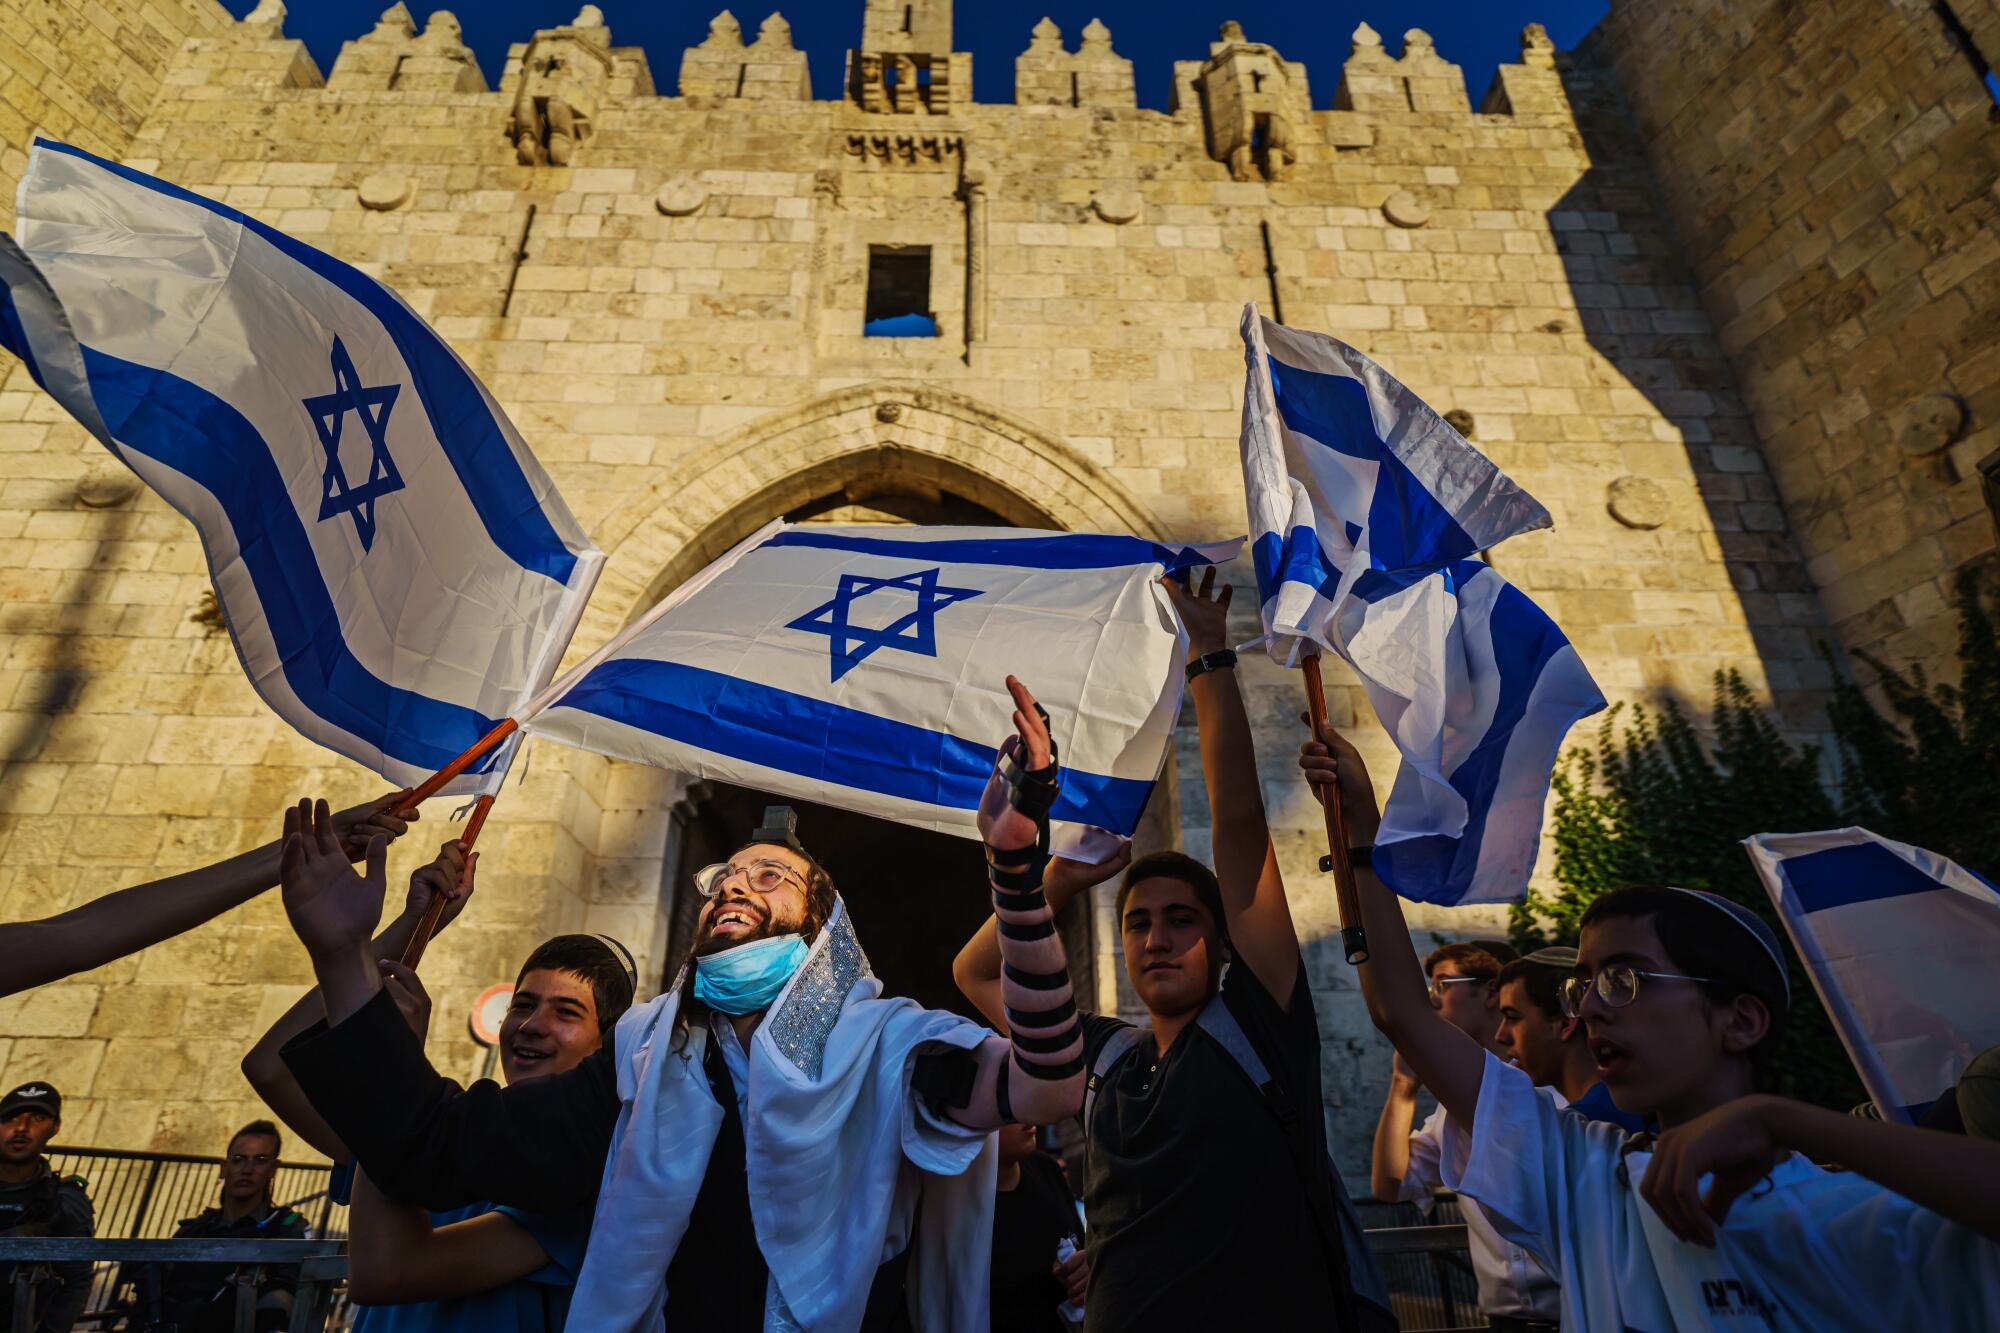 A man lifts his arms in the air amid a crowd waving Israeli flags.